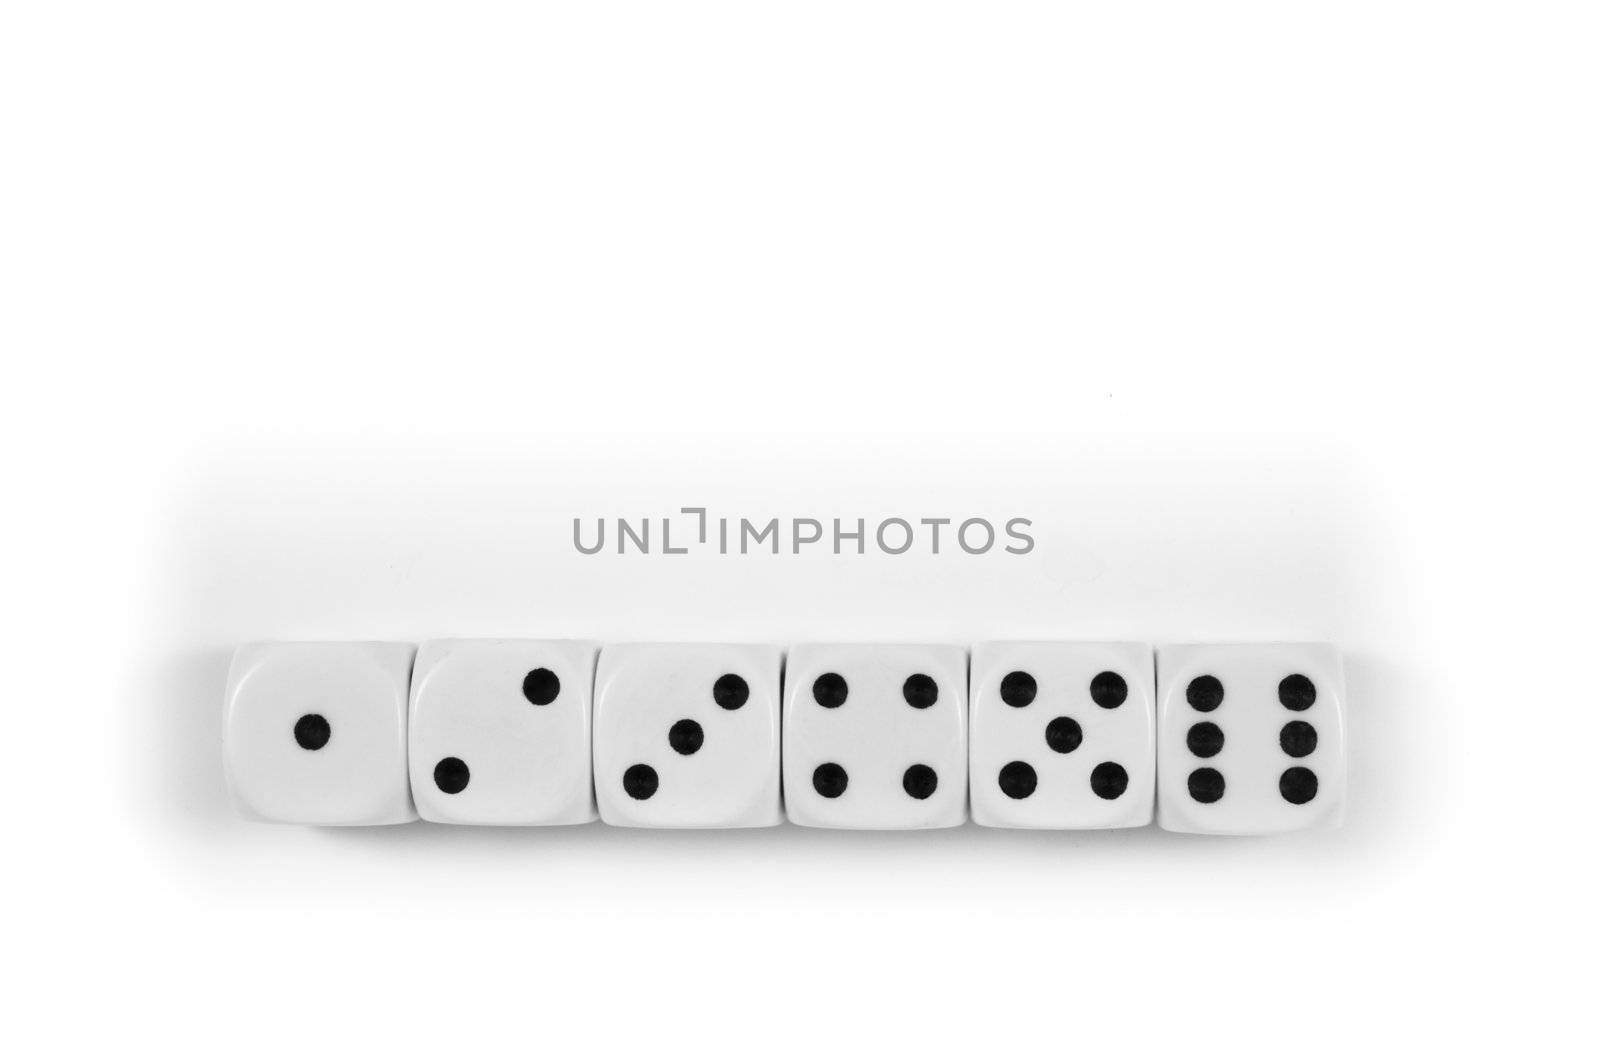 Black and white dice by rigamondis